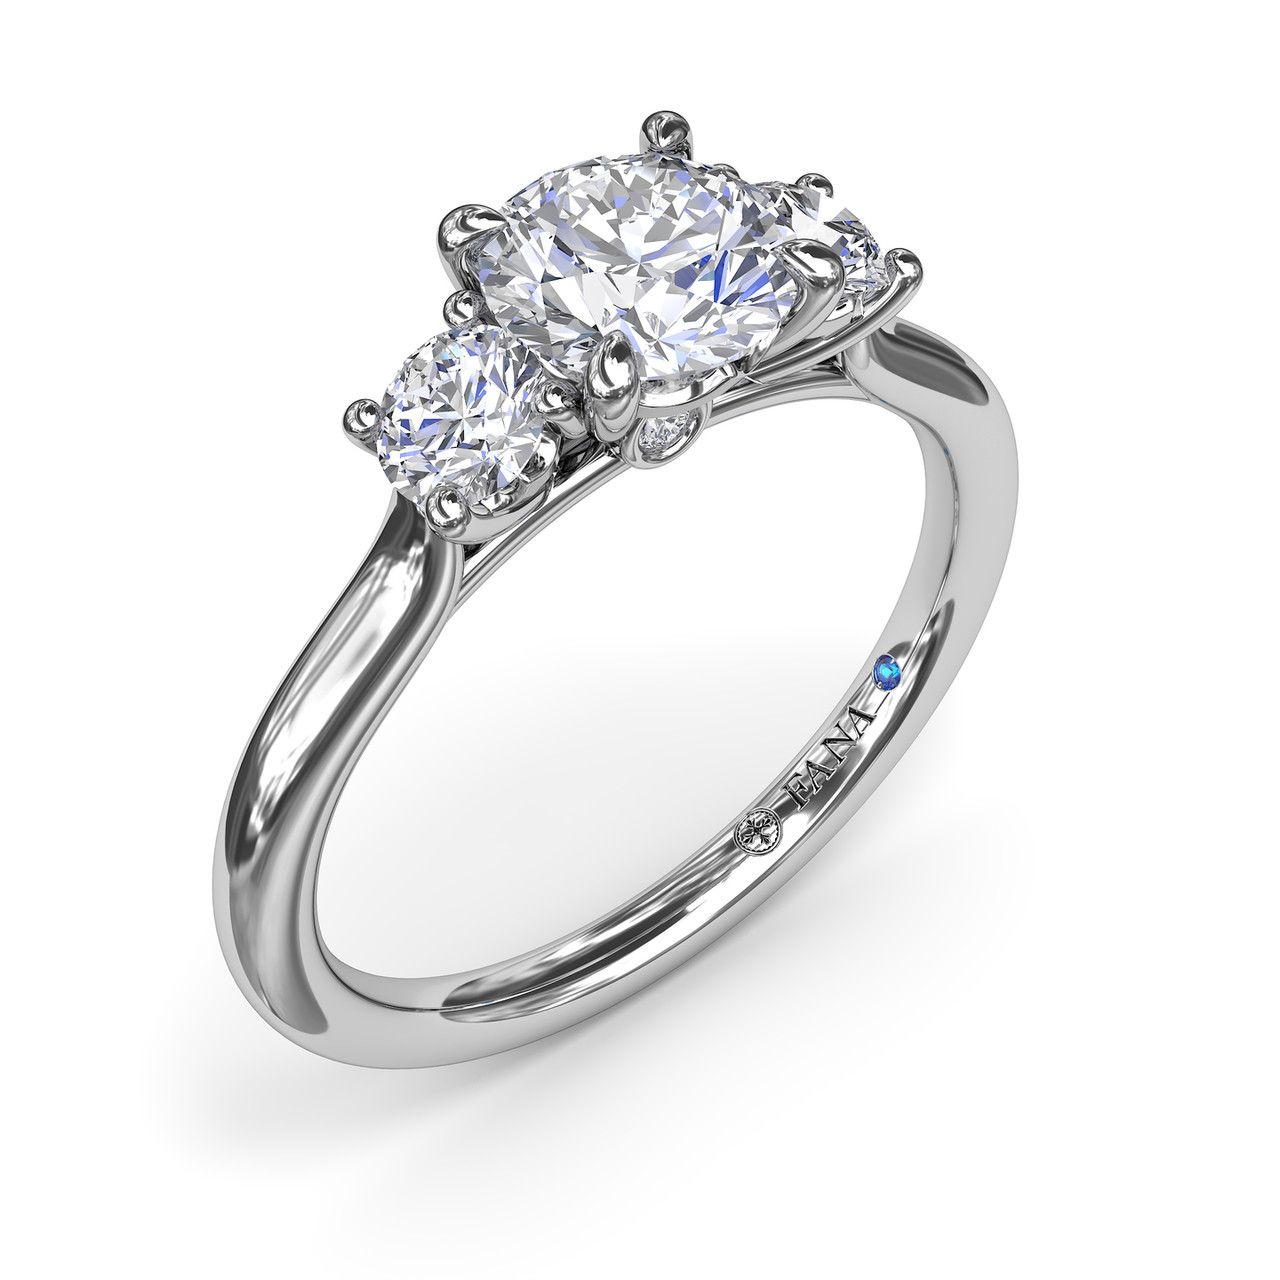 14K WHITE GOLD 3 STONE SEMI-MOUNT RING SIZE 6.5 WITH 4=0.34TW ROUND G-H VS2-SI1 DIAMONDS AND ONE ROUND BLUE SAPPHIRE  (2.68 GRAMS)